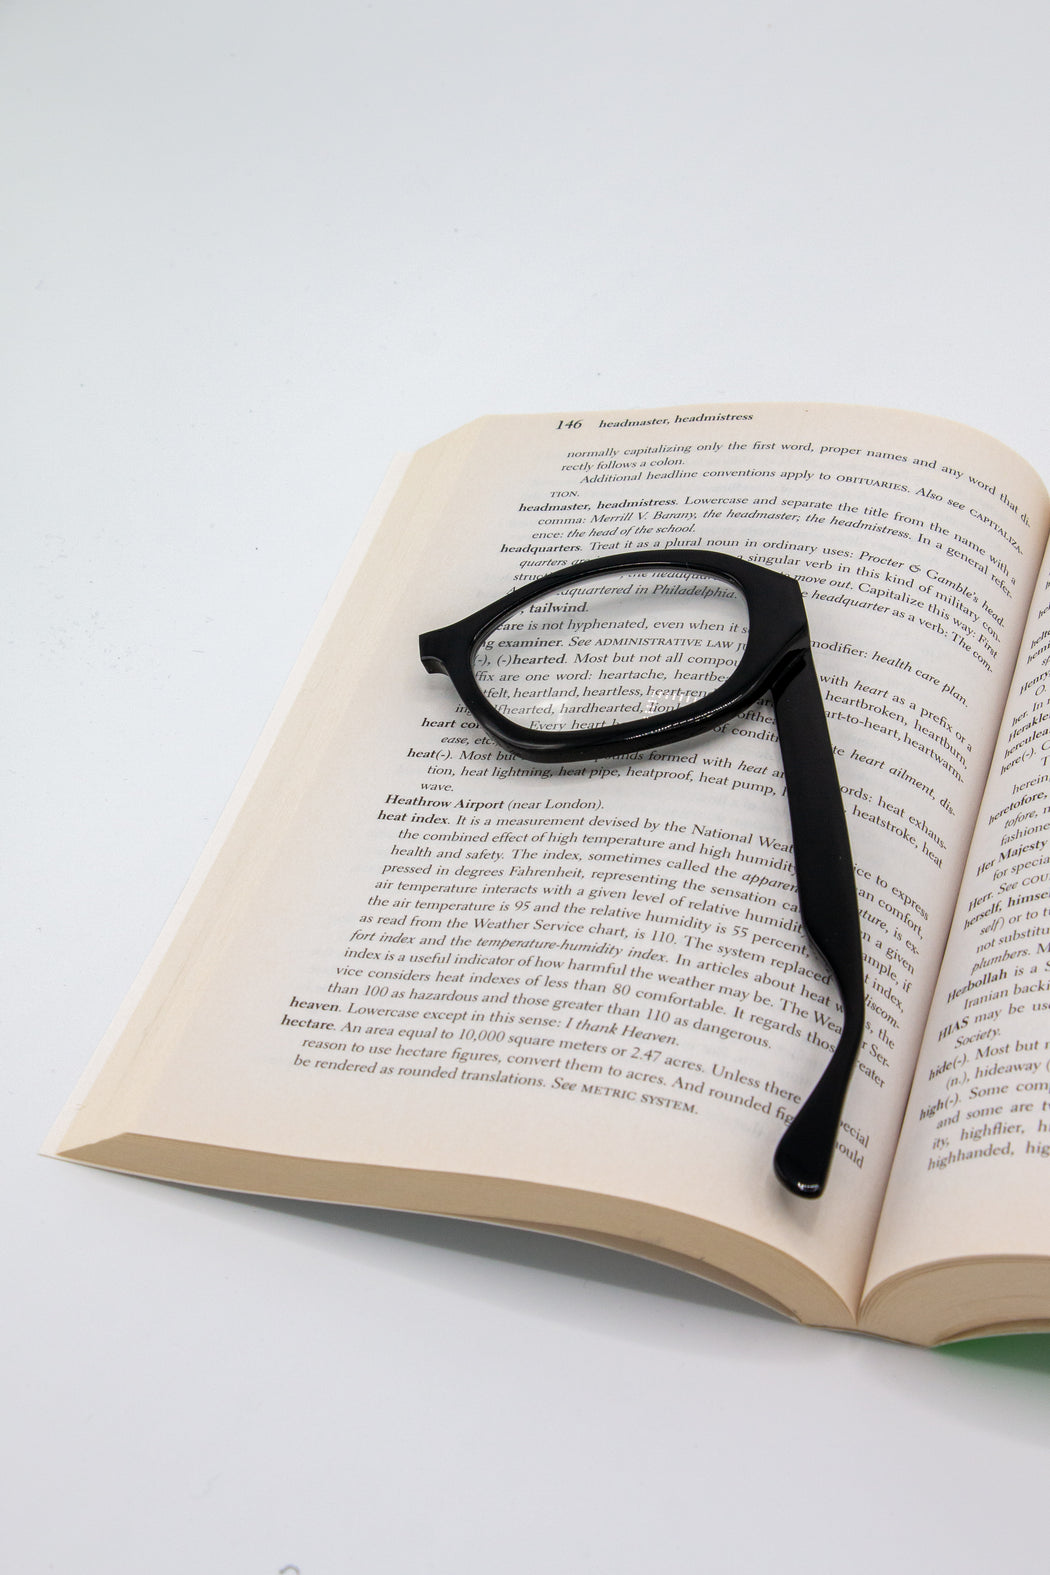 Black Monocle Magnifying Glass on book